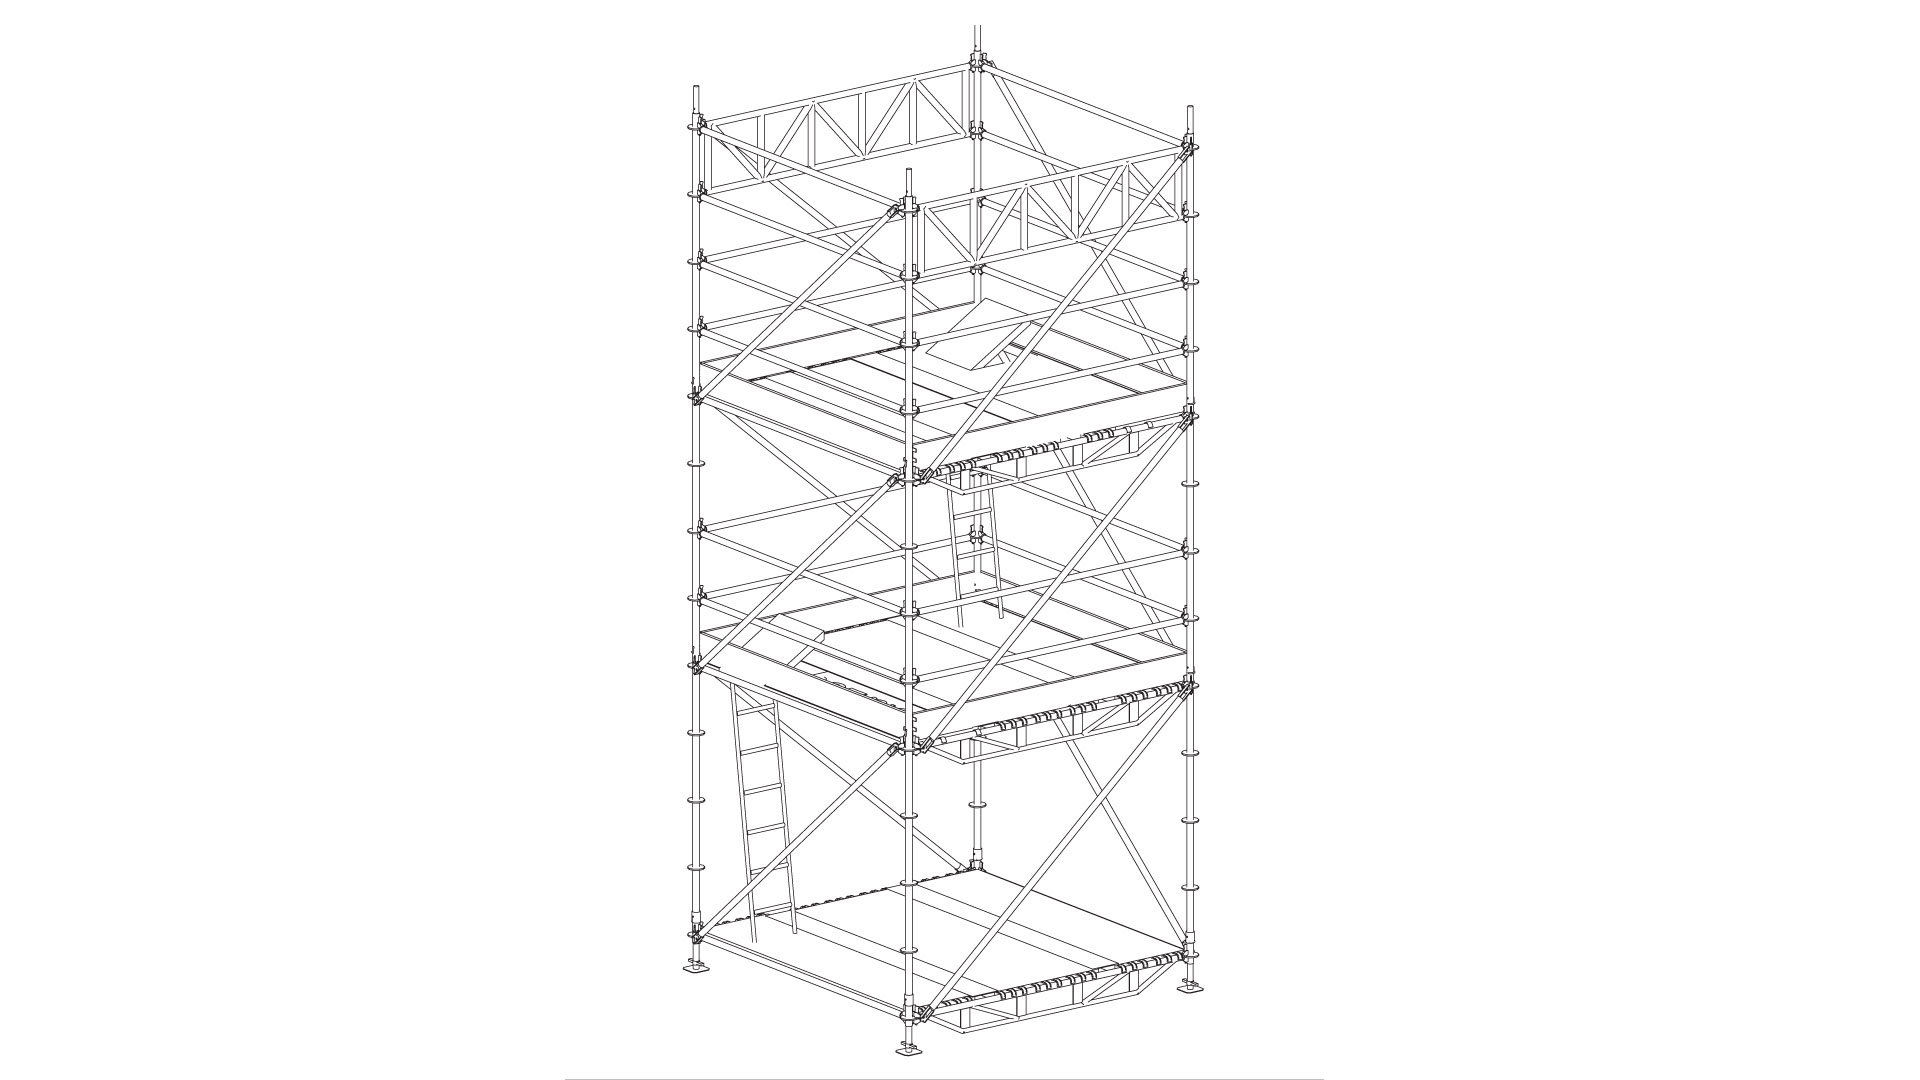 Audio, lights and direction towers scaffolding